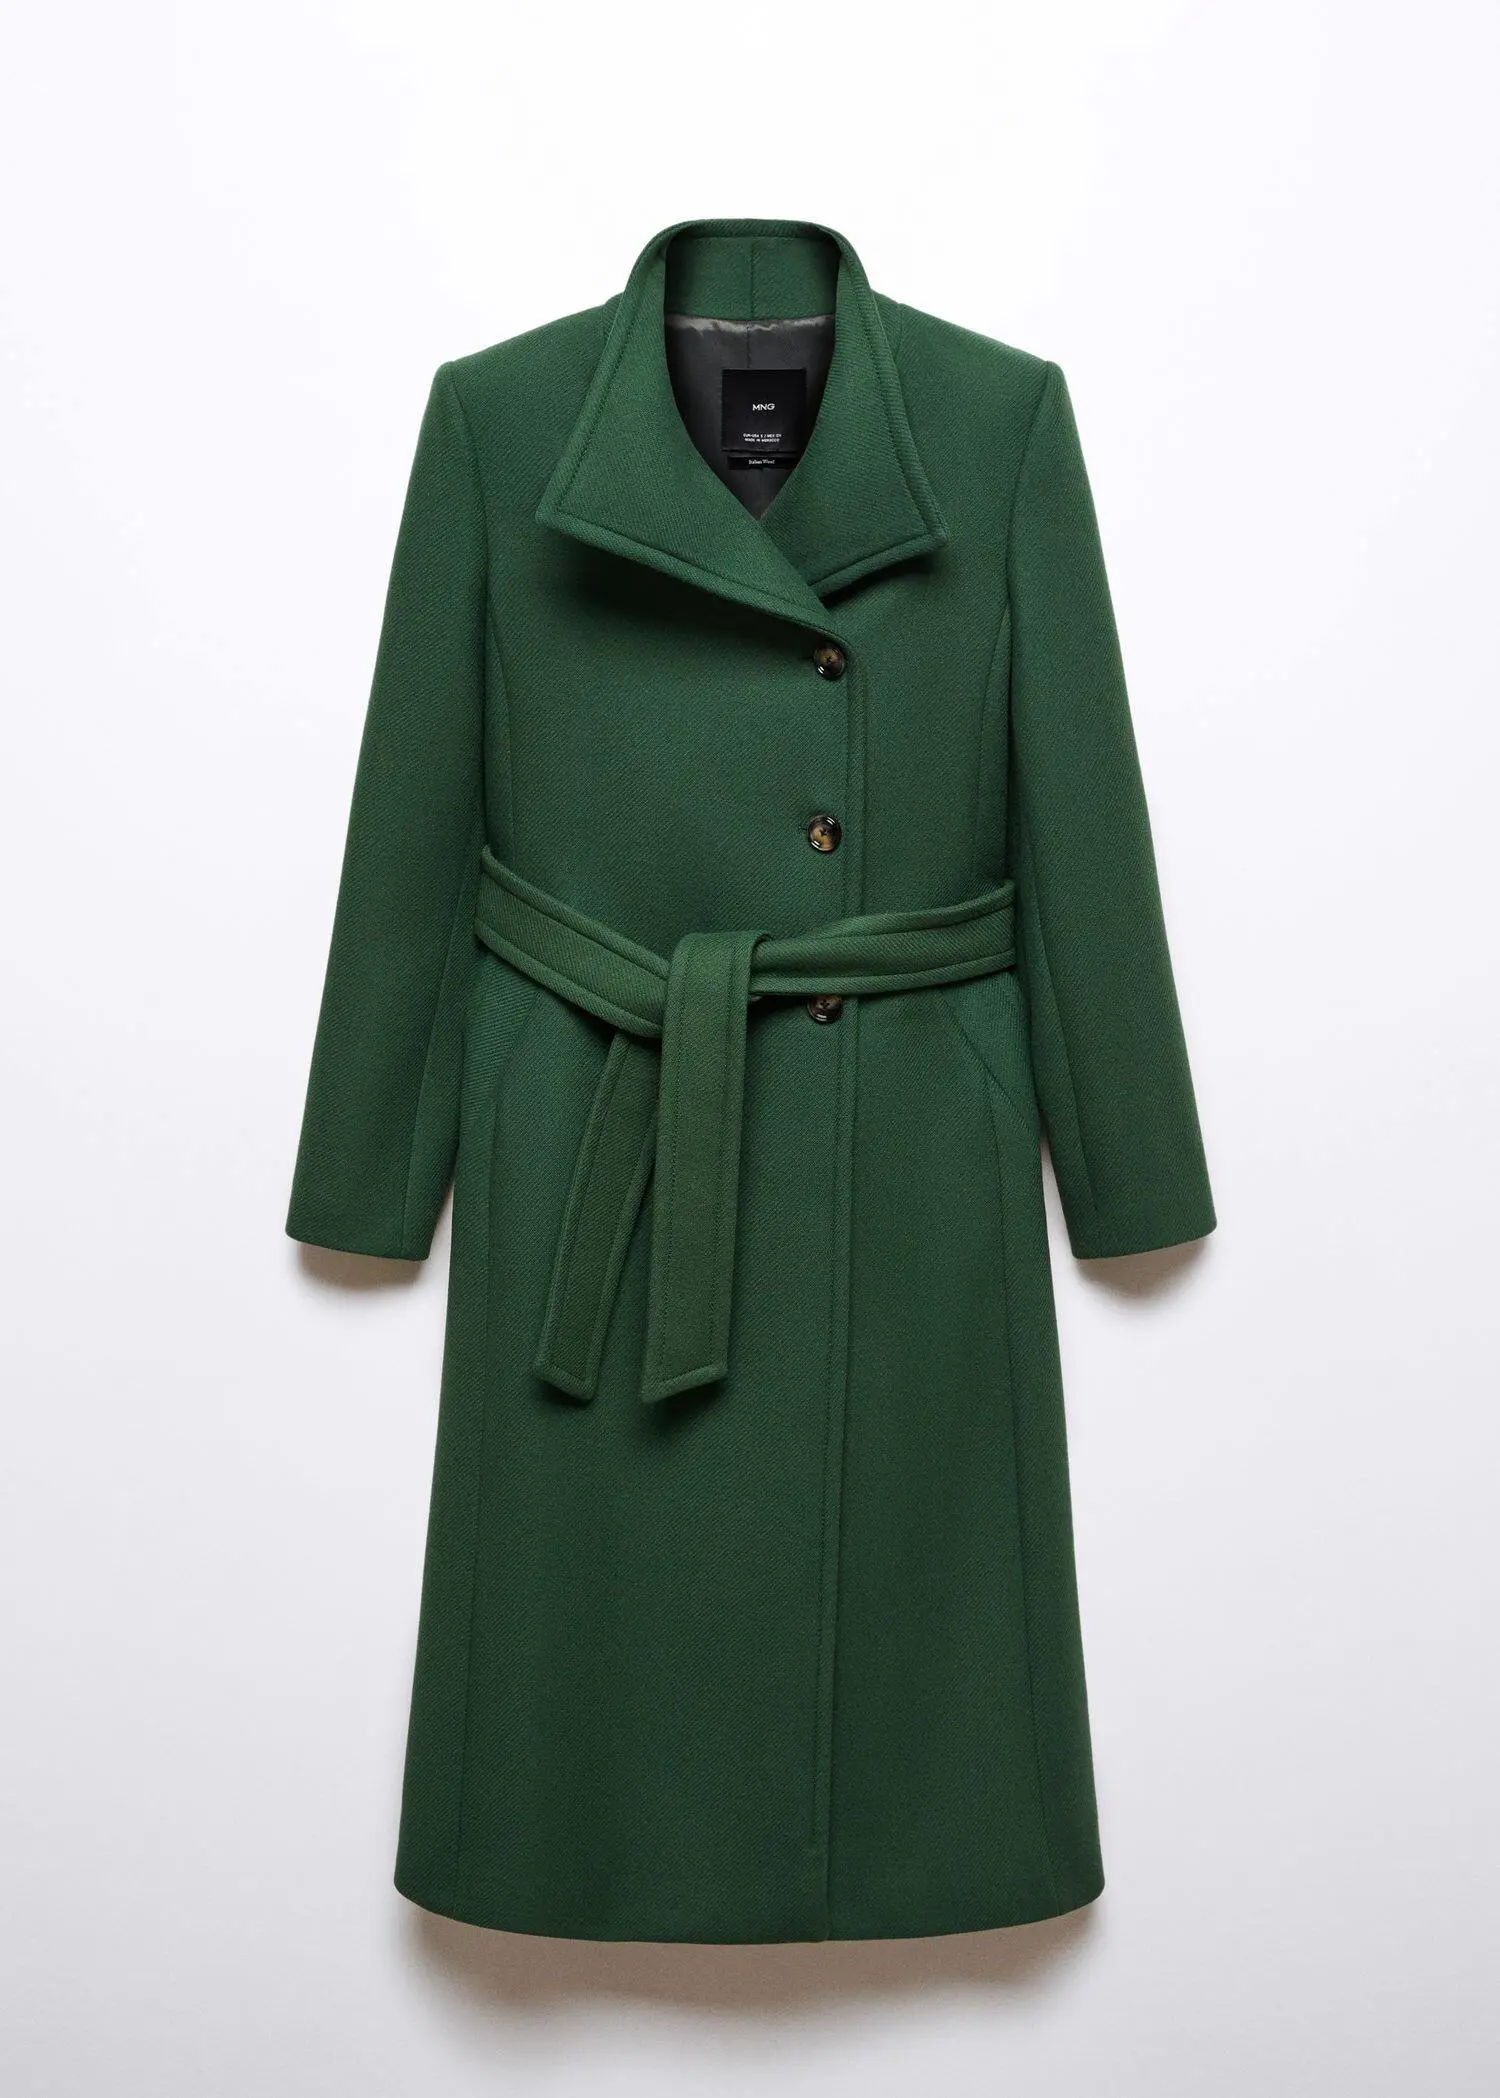 Mango Woollen coat with belt. a green coat is shown on a white background. 